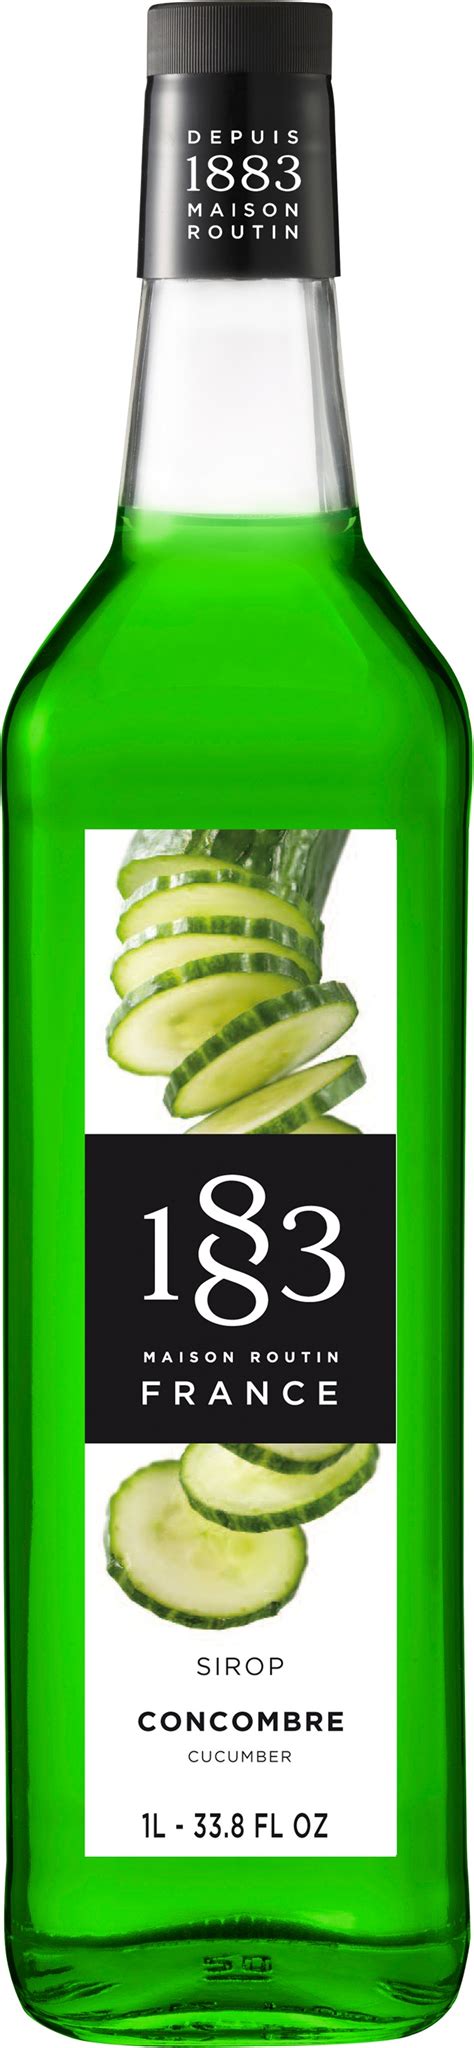 Cucumber Syrup GLASS 1L Bottle Gourmet Syrups 1883 Maison Routin